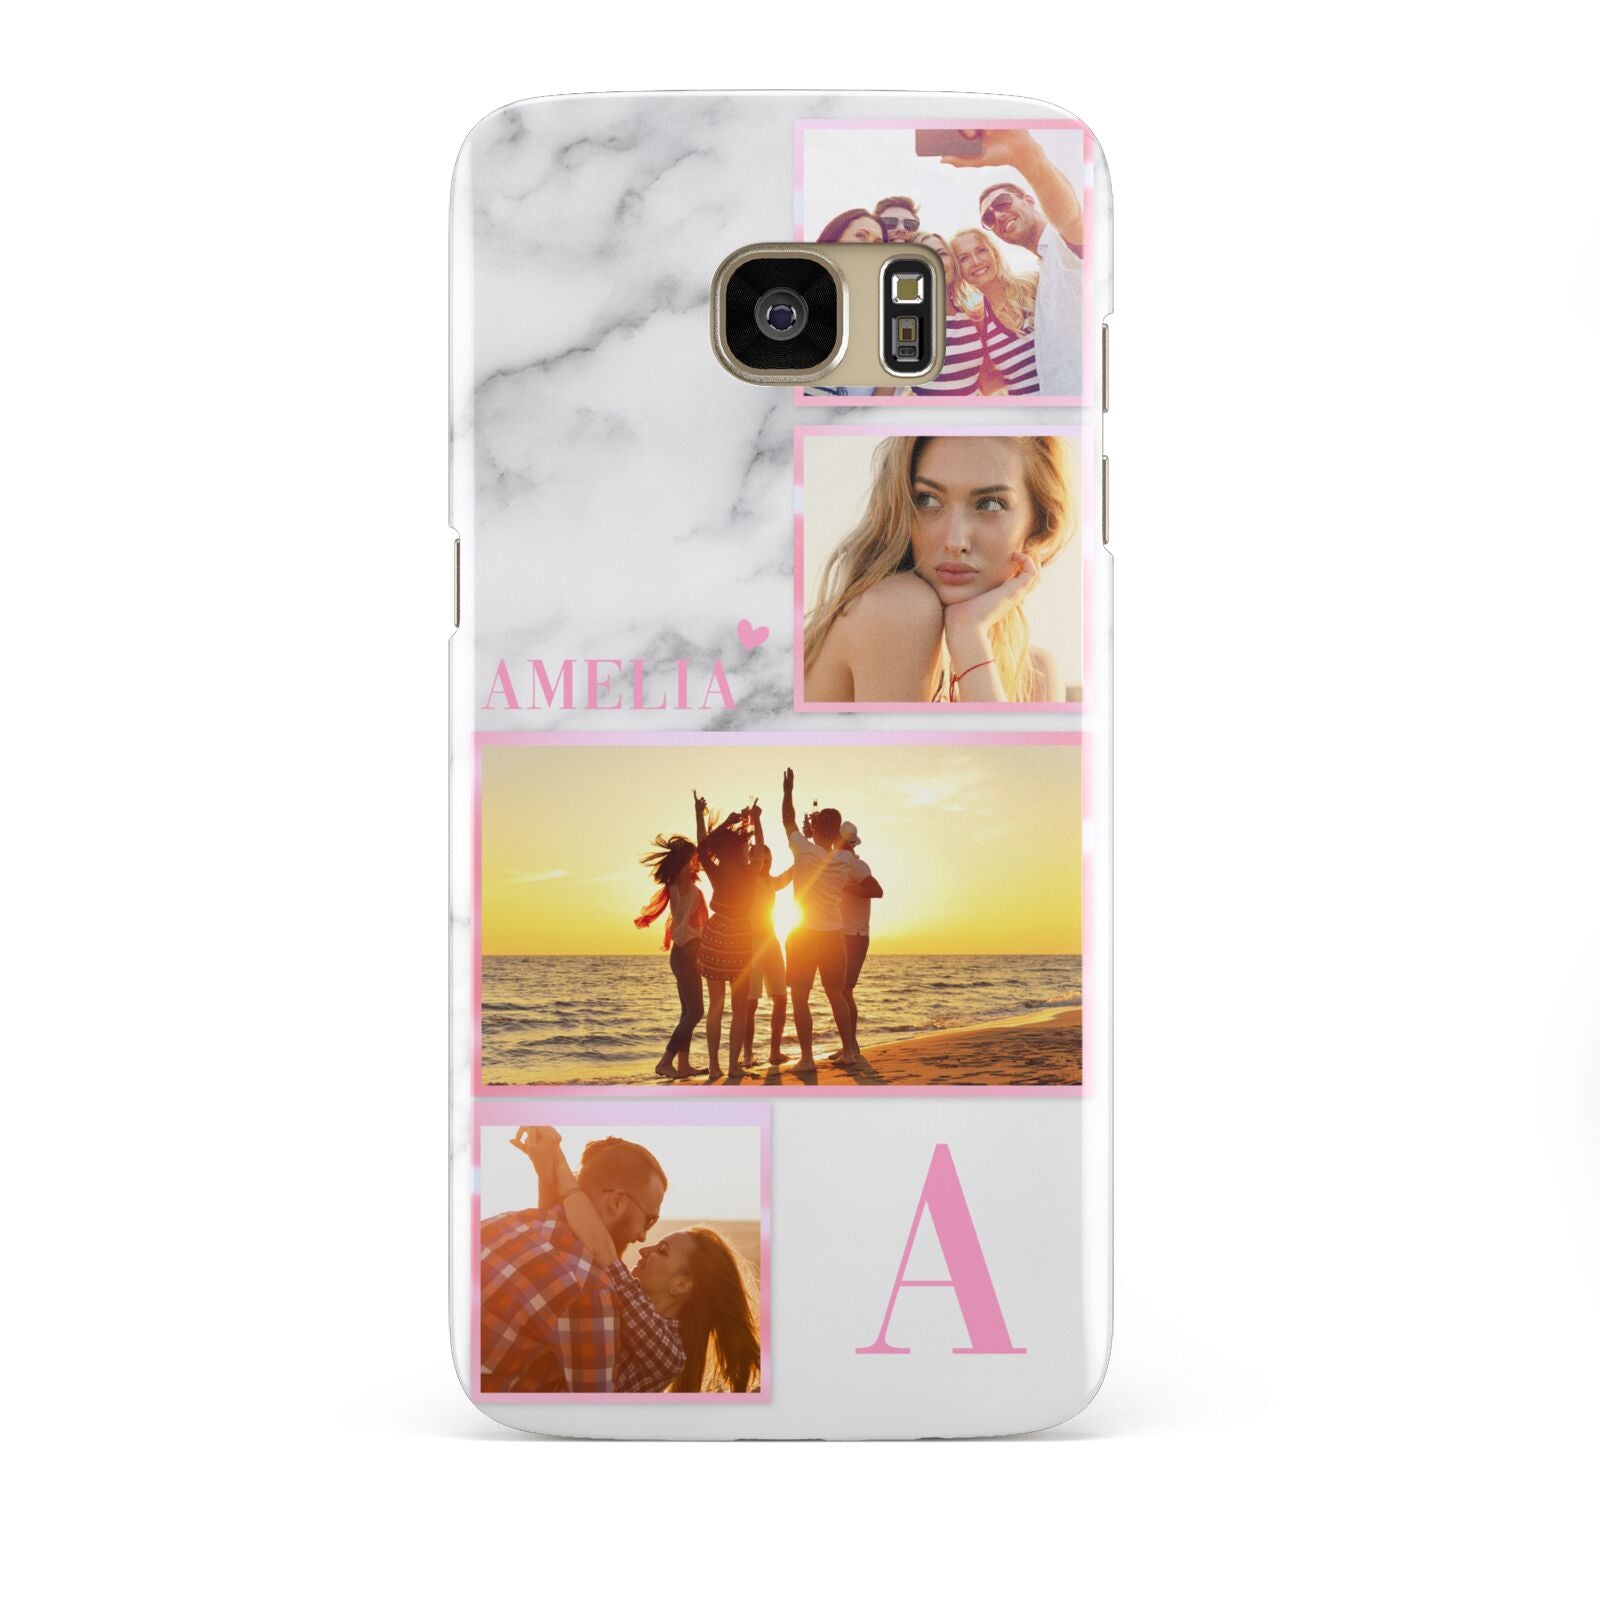 Personalised Marble Photo Collage Samsung Galaxy S7 Edge Case